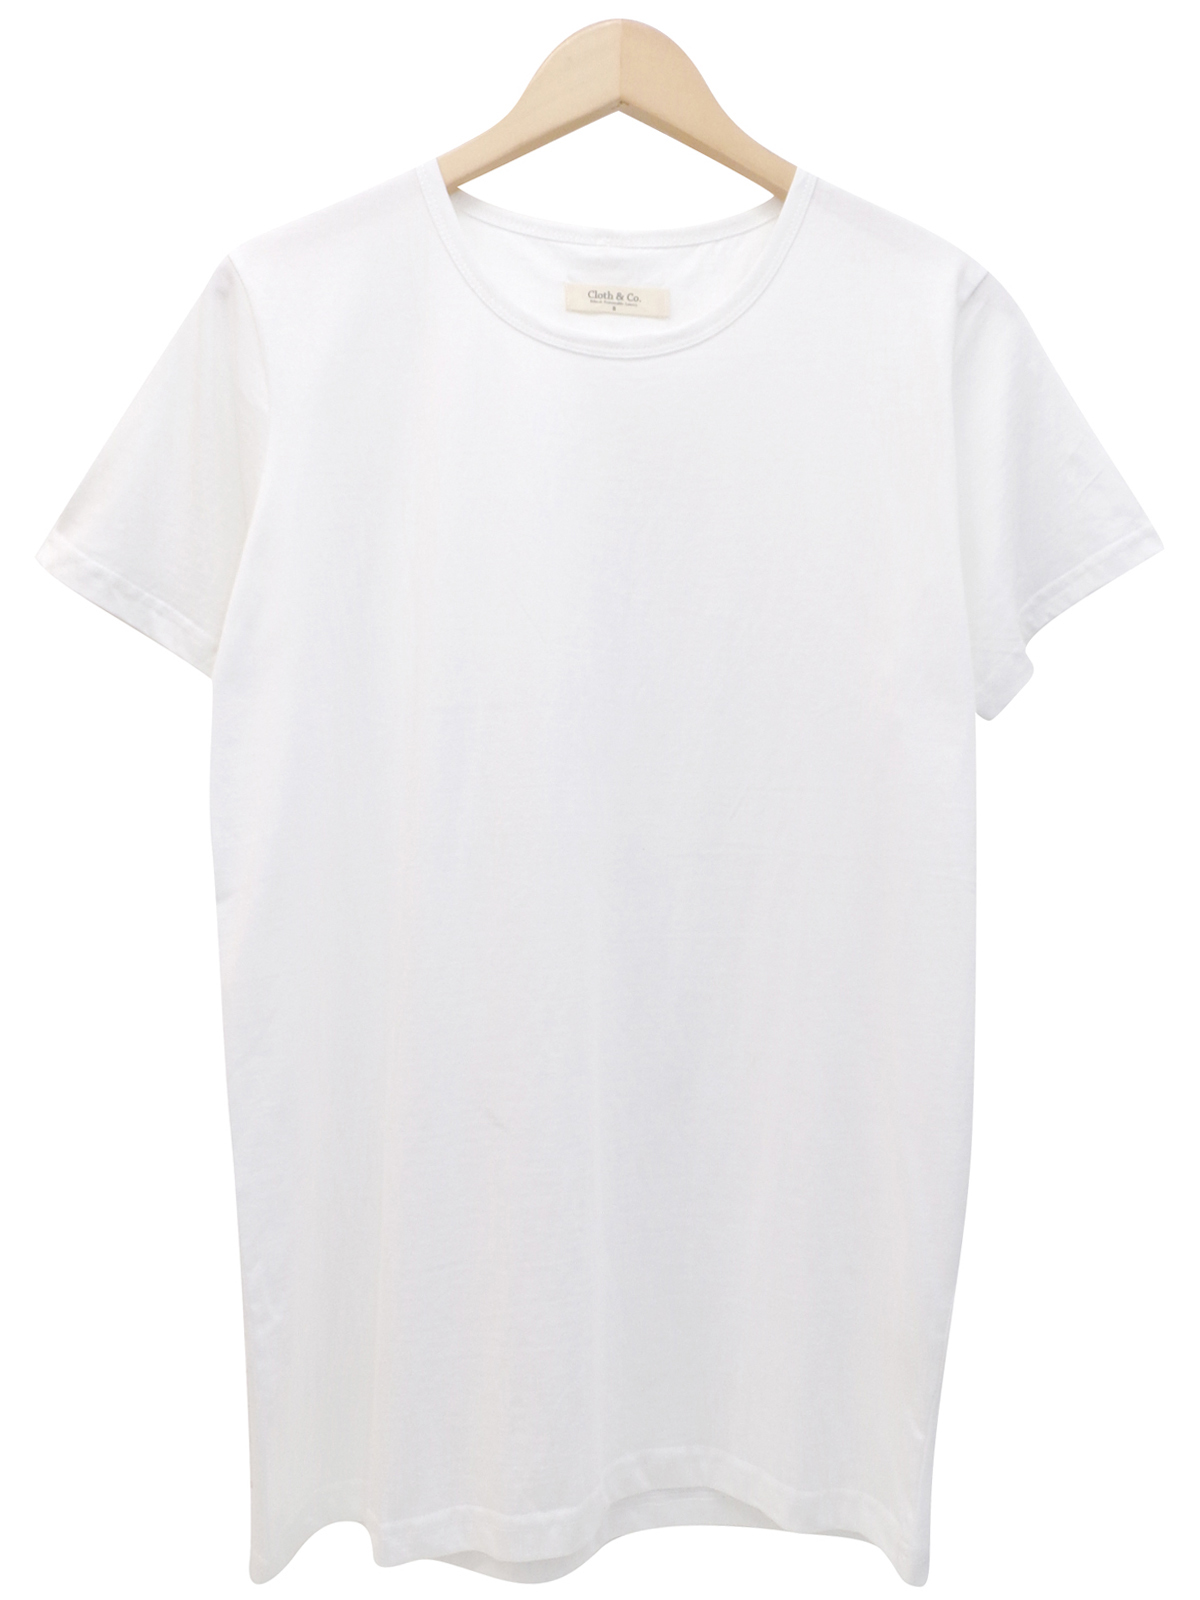 Cloth & Co - - Cloth&Co WHITE Organic Cotton Short Sleeve Top - Size 12 ...